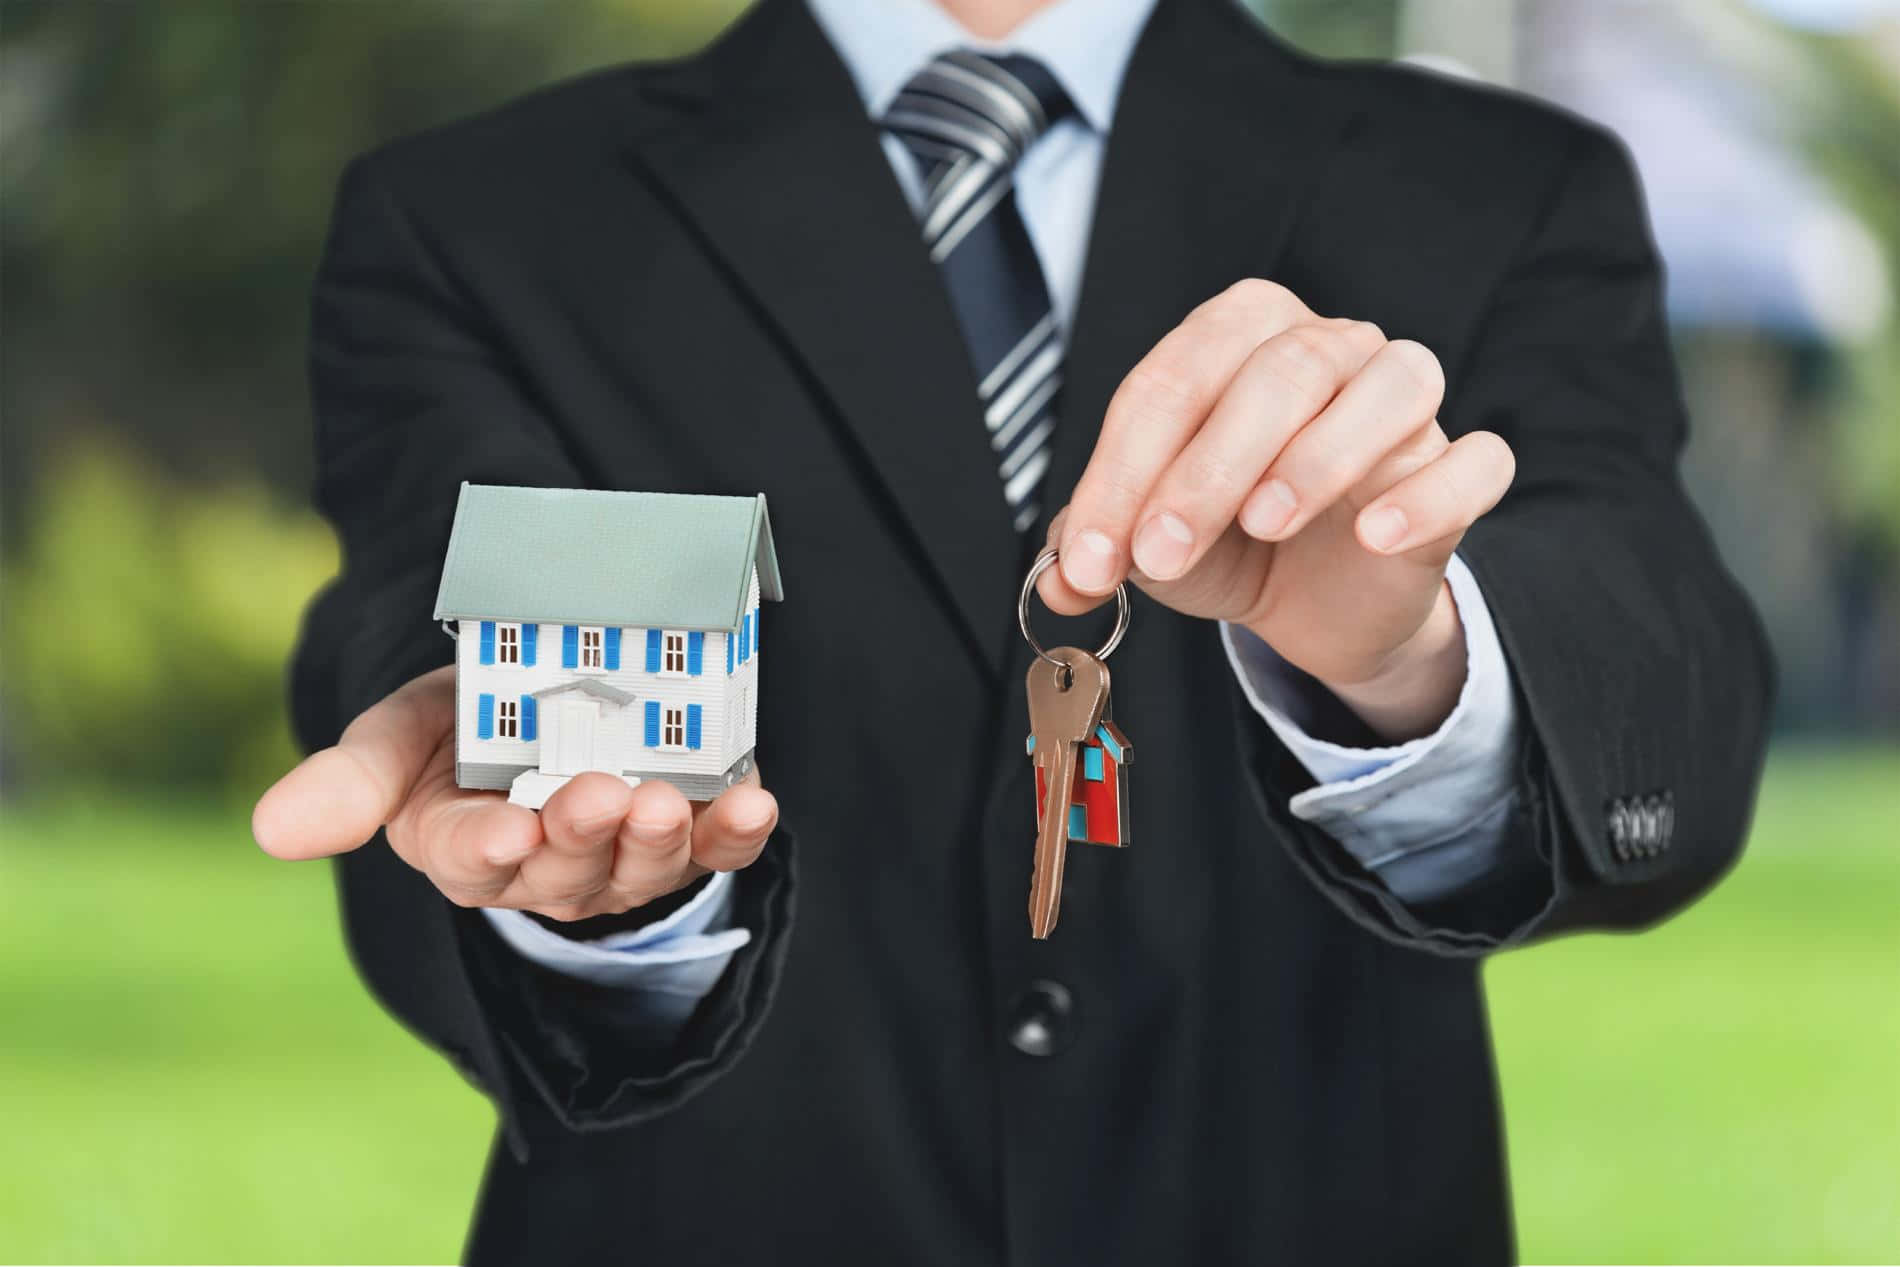 A Man Holding A House Model And Keys